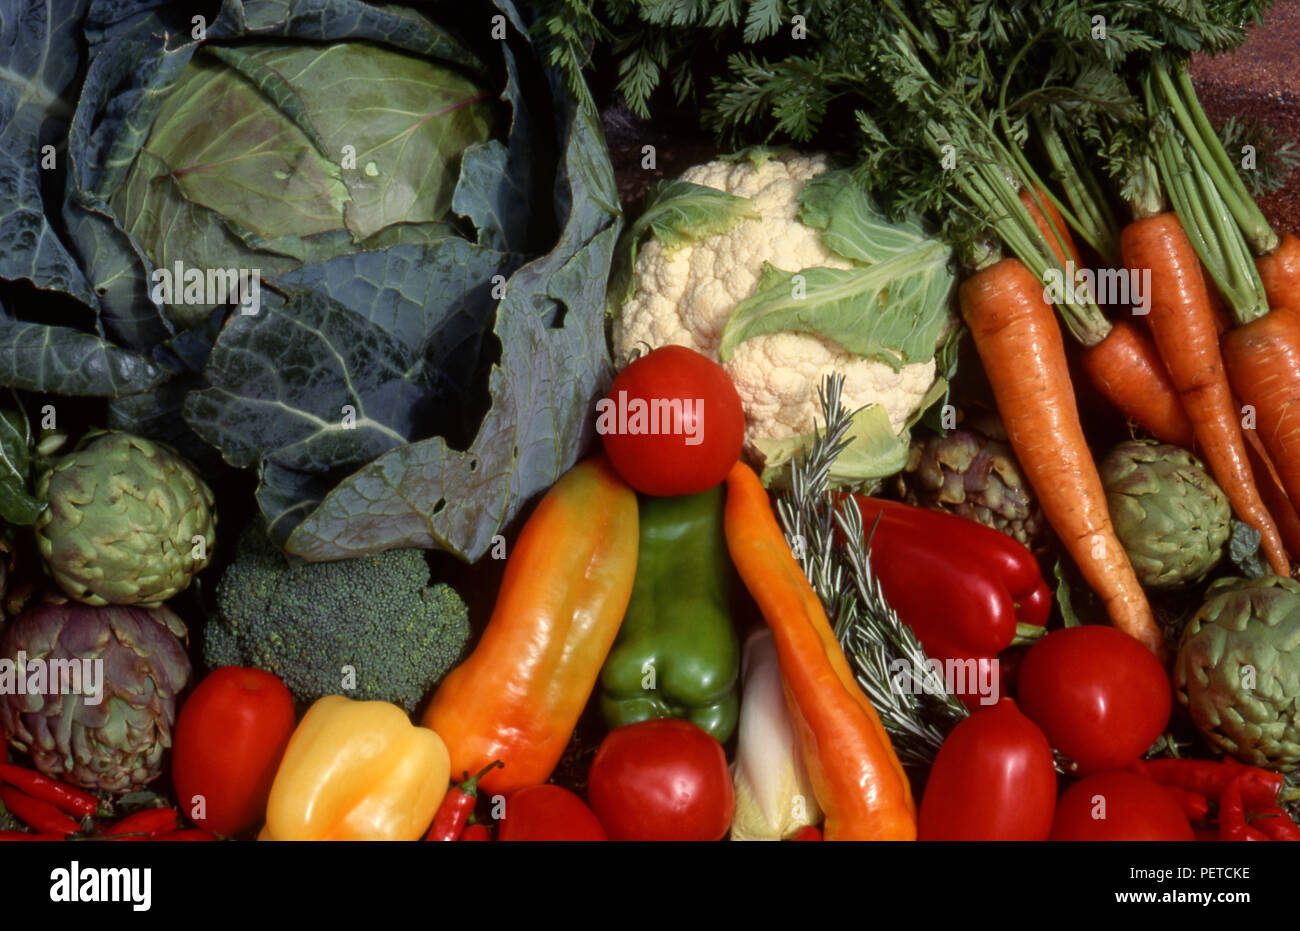 Assorted harvested fresh vegetables including carrots, cabbage, cauliflower, globe artichokes, capsicums and tomatoes Stock Photo